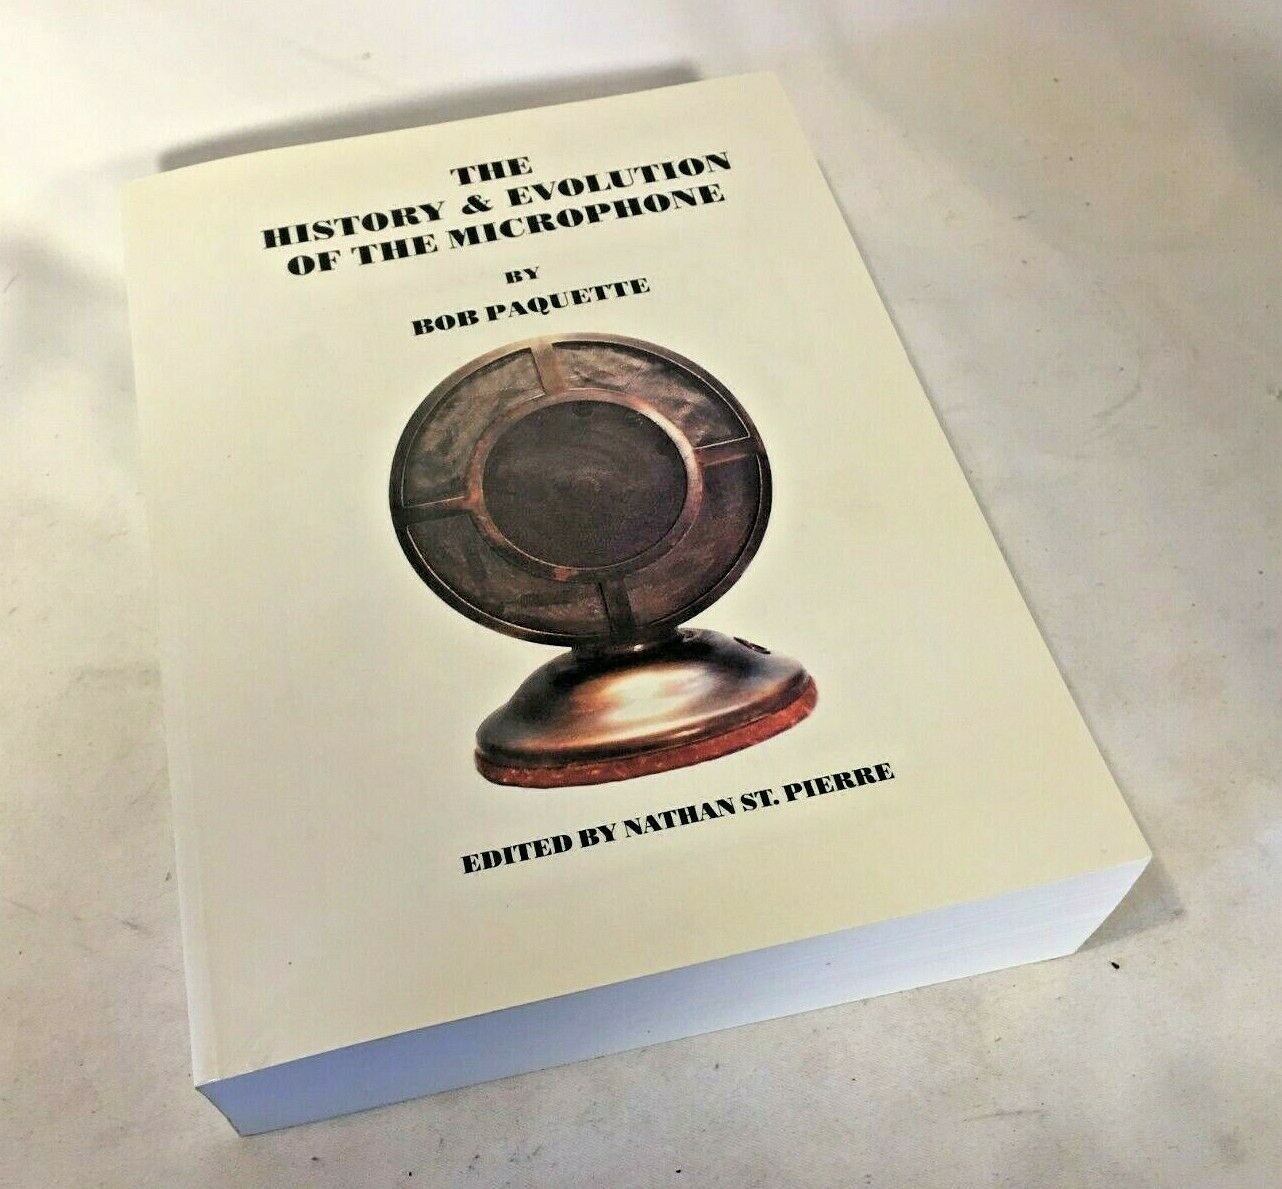 Bob Paquette “History And Evolution Of The Microphone” Book Signed By Bob RARE!